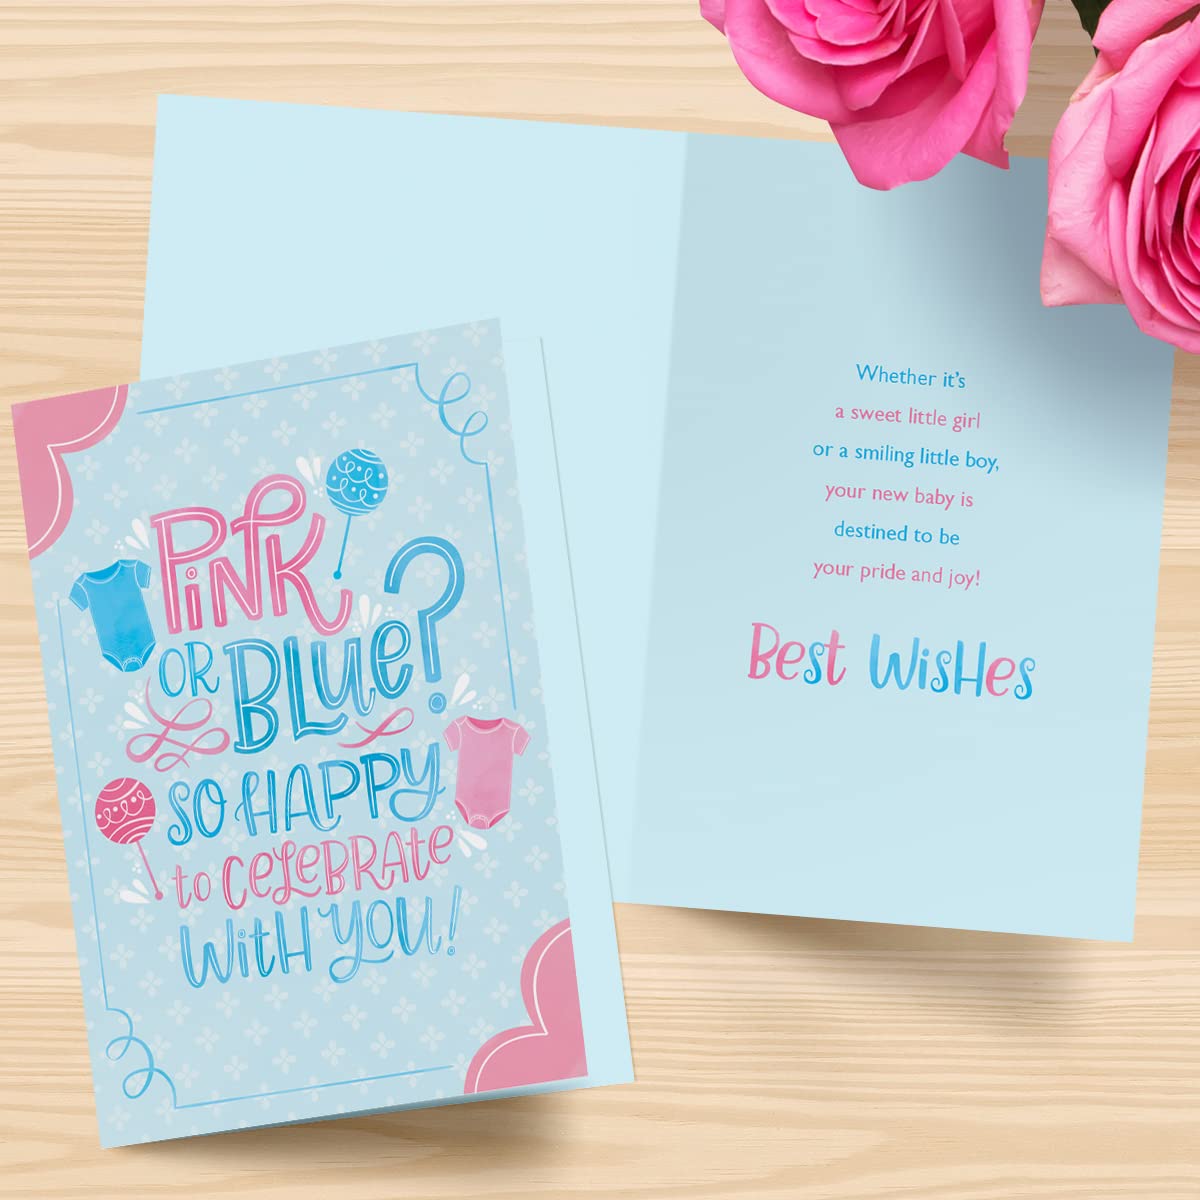 Designer Greetings Baby Gender Reveal Cards – Cute Pink and Blue Baby Accessory Design (6 Cards with Envelopes)